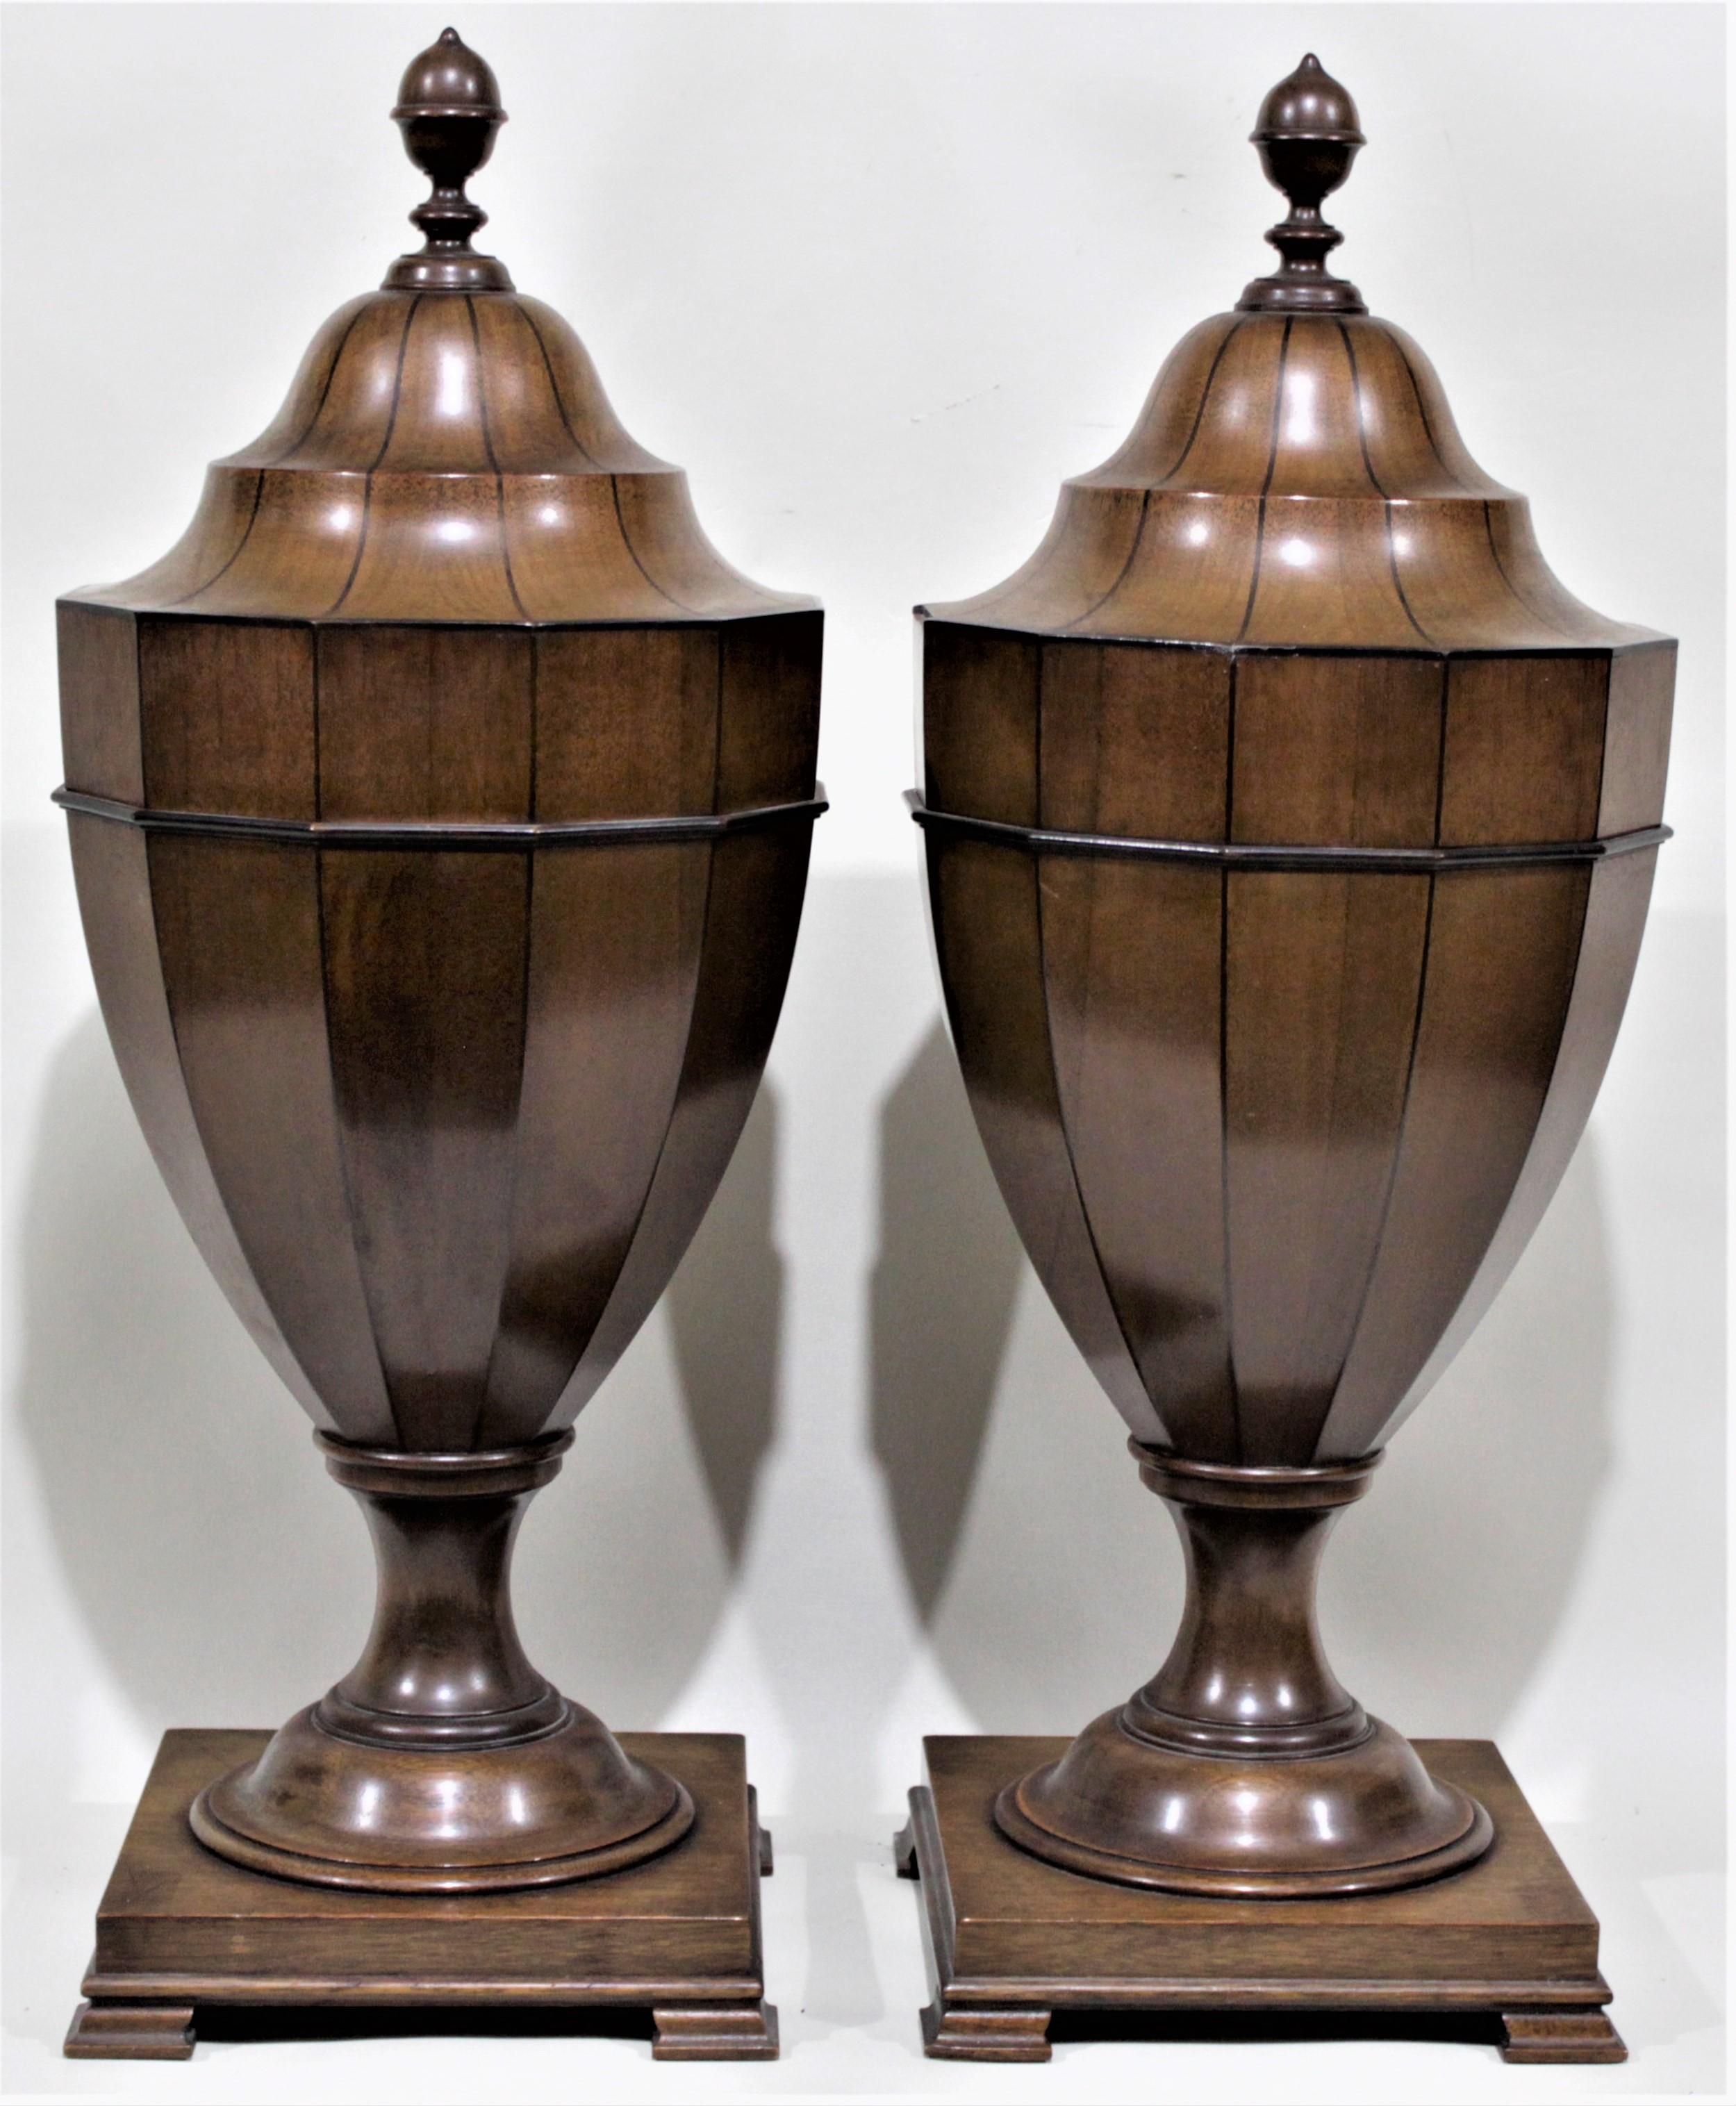 This matched pair of solid mahogany knife urns were made in the Georgian style, presumably in the United States during the 1930s. Each finial functions as a handle to raise the top to expose the storage for knives. The urns each sit on a footed